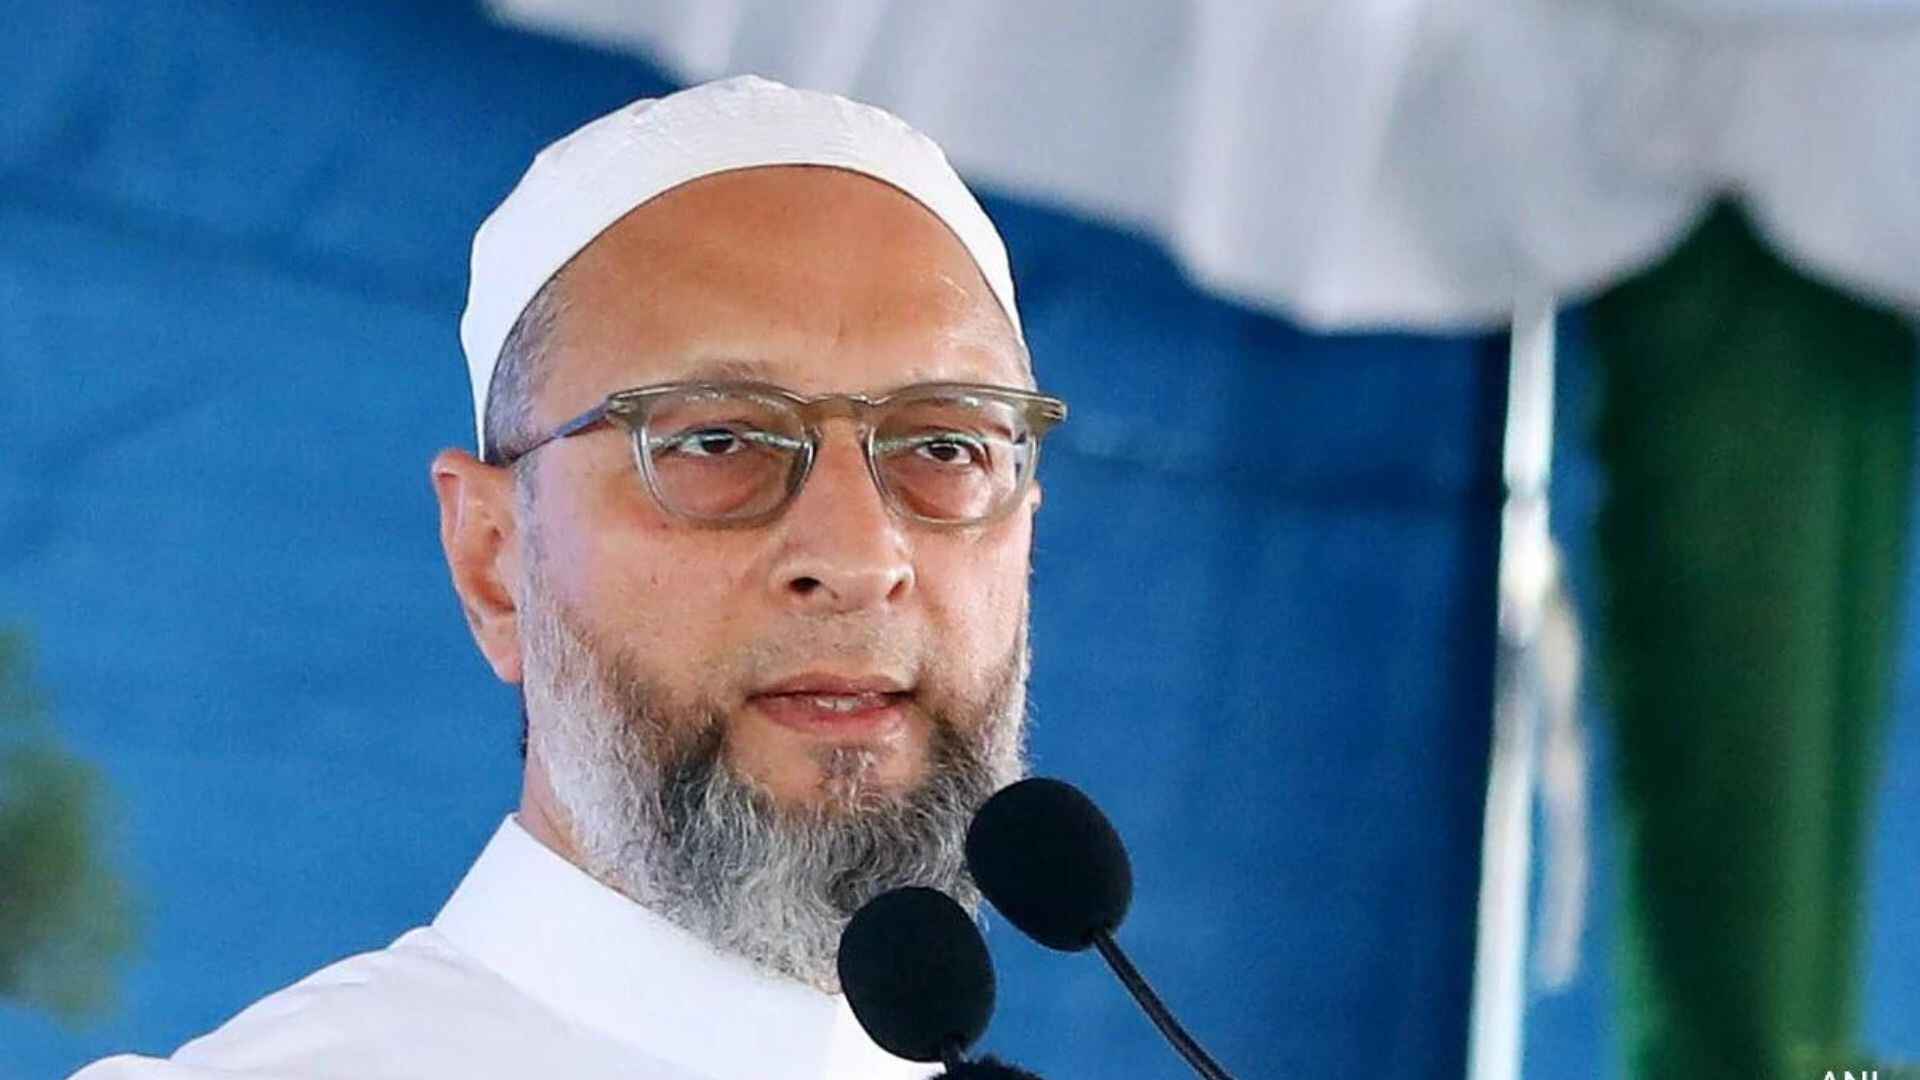 asaduddin-owaisi-says-president-murmu-referred-to-bcs-scs-and-sts-in-her-speech-but-did-not-make-a-single-reference-to-minorities